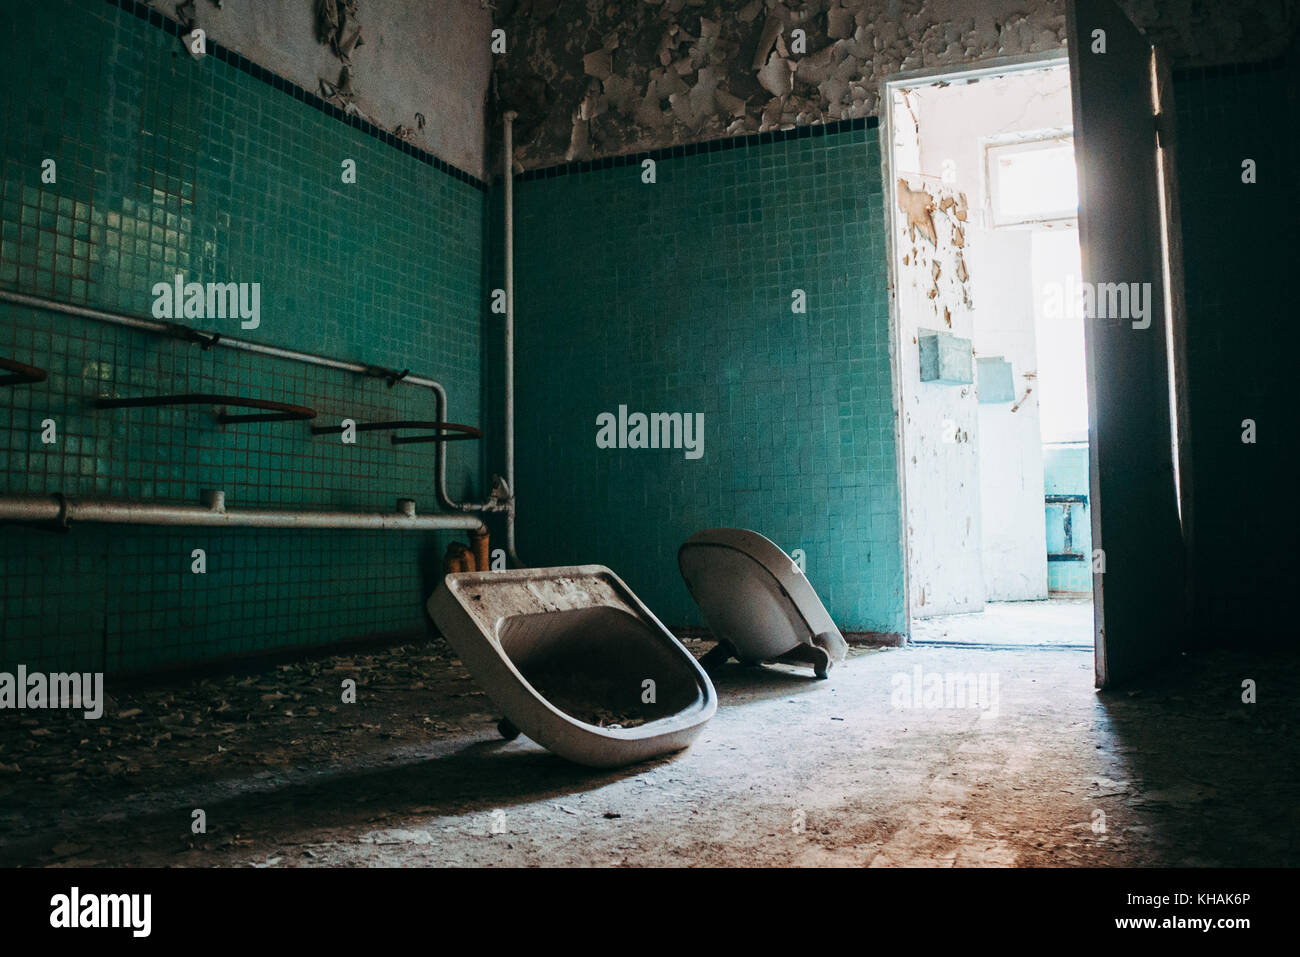 Two hand basins lie detached from the wall inside an abandoned building in Chernobyl, Ukraine Stock Photo